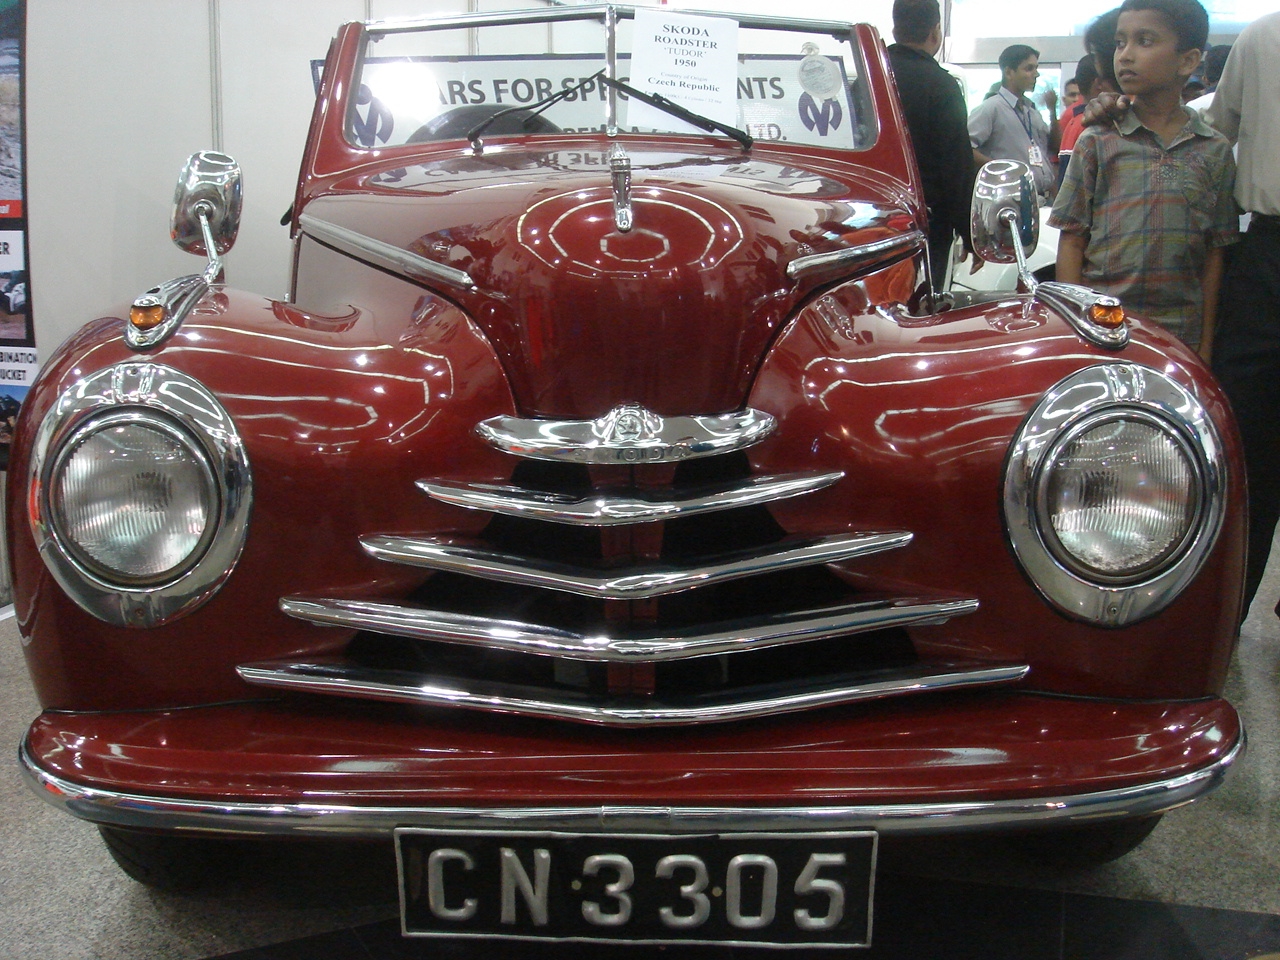 a vintage car on display at a show